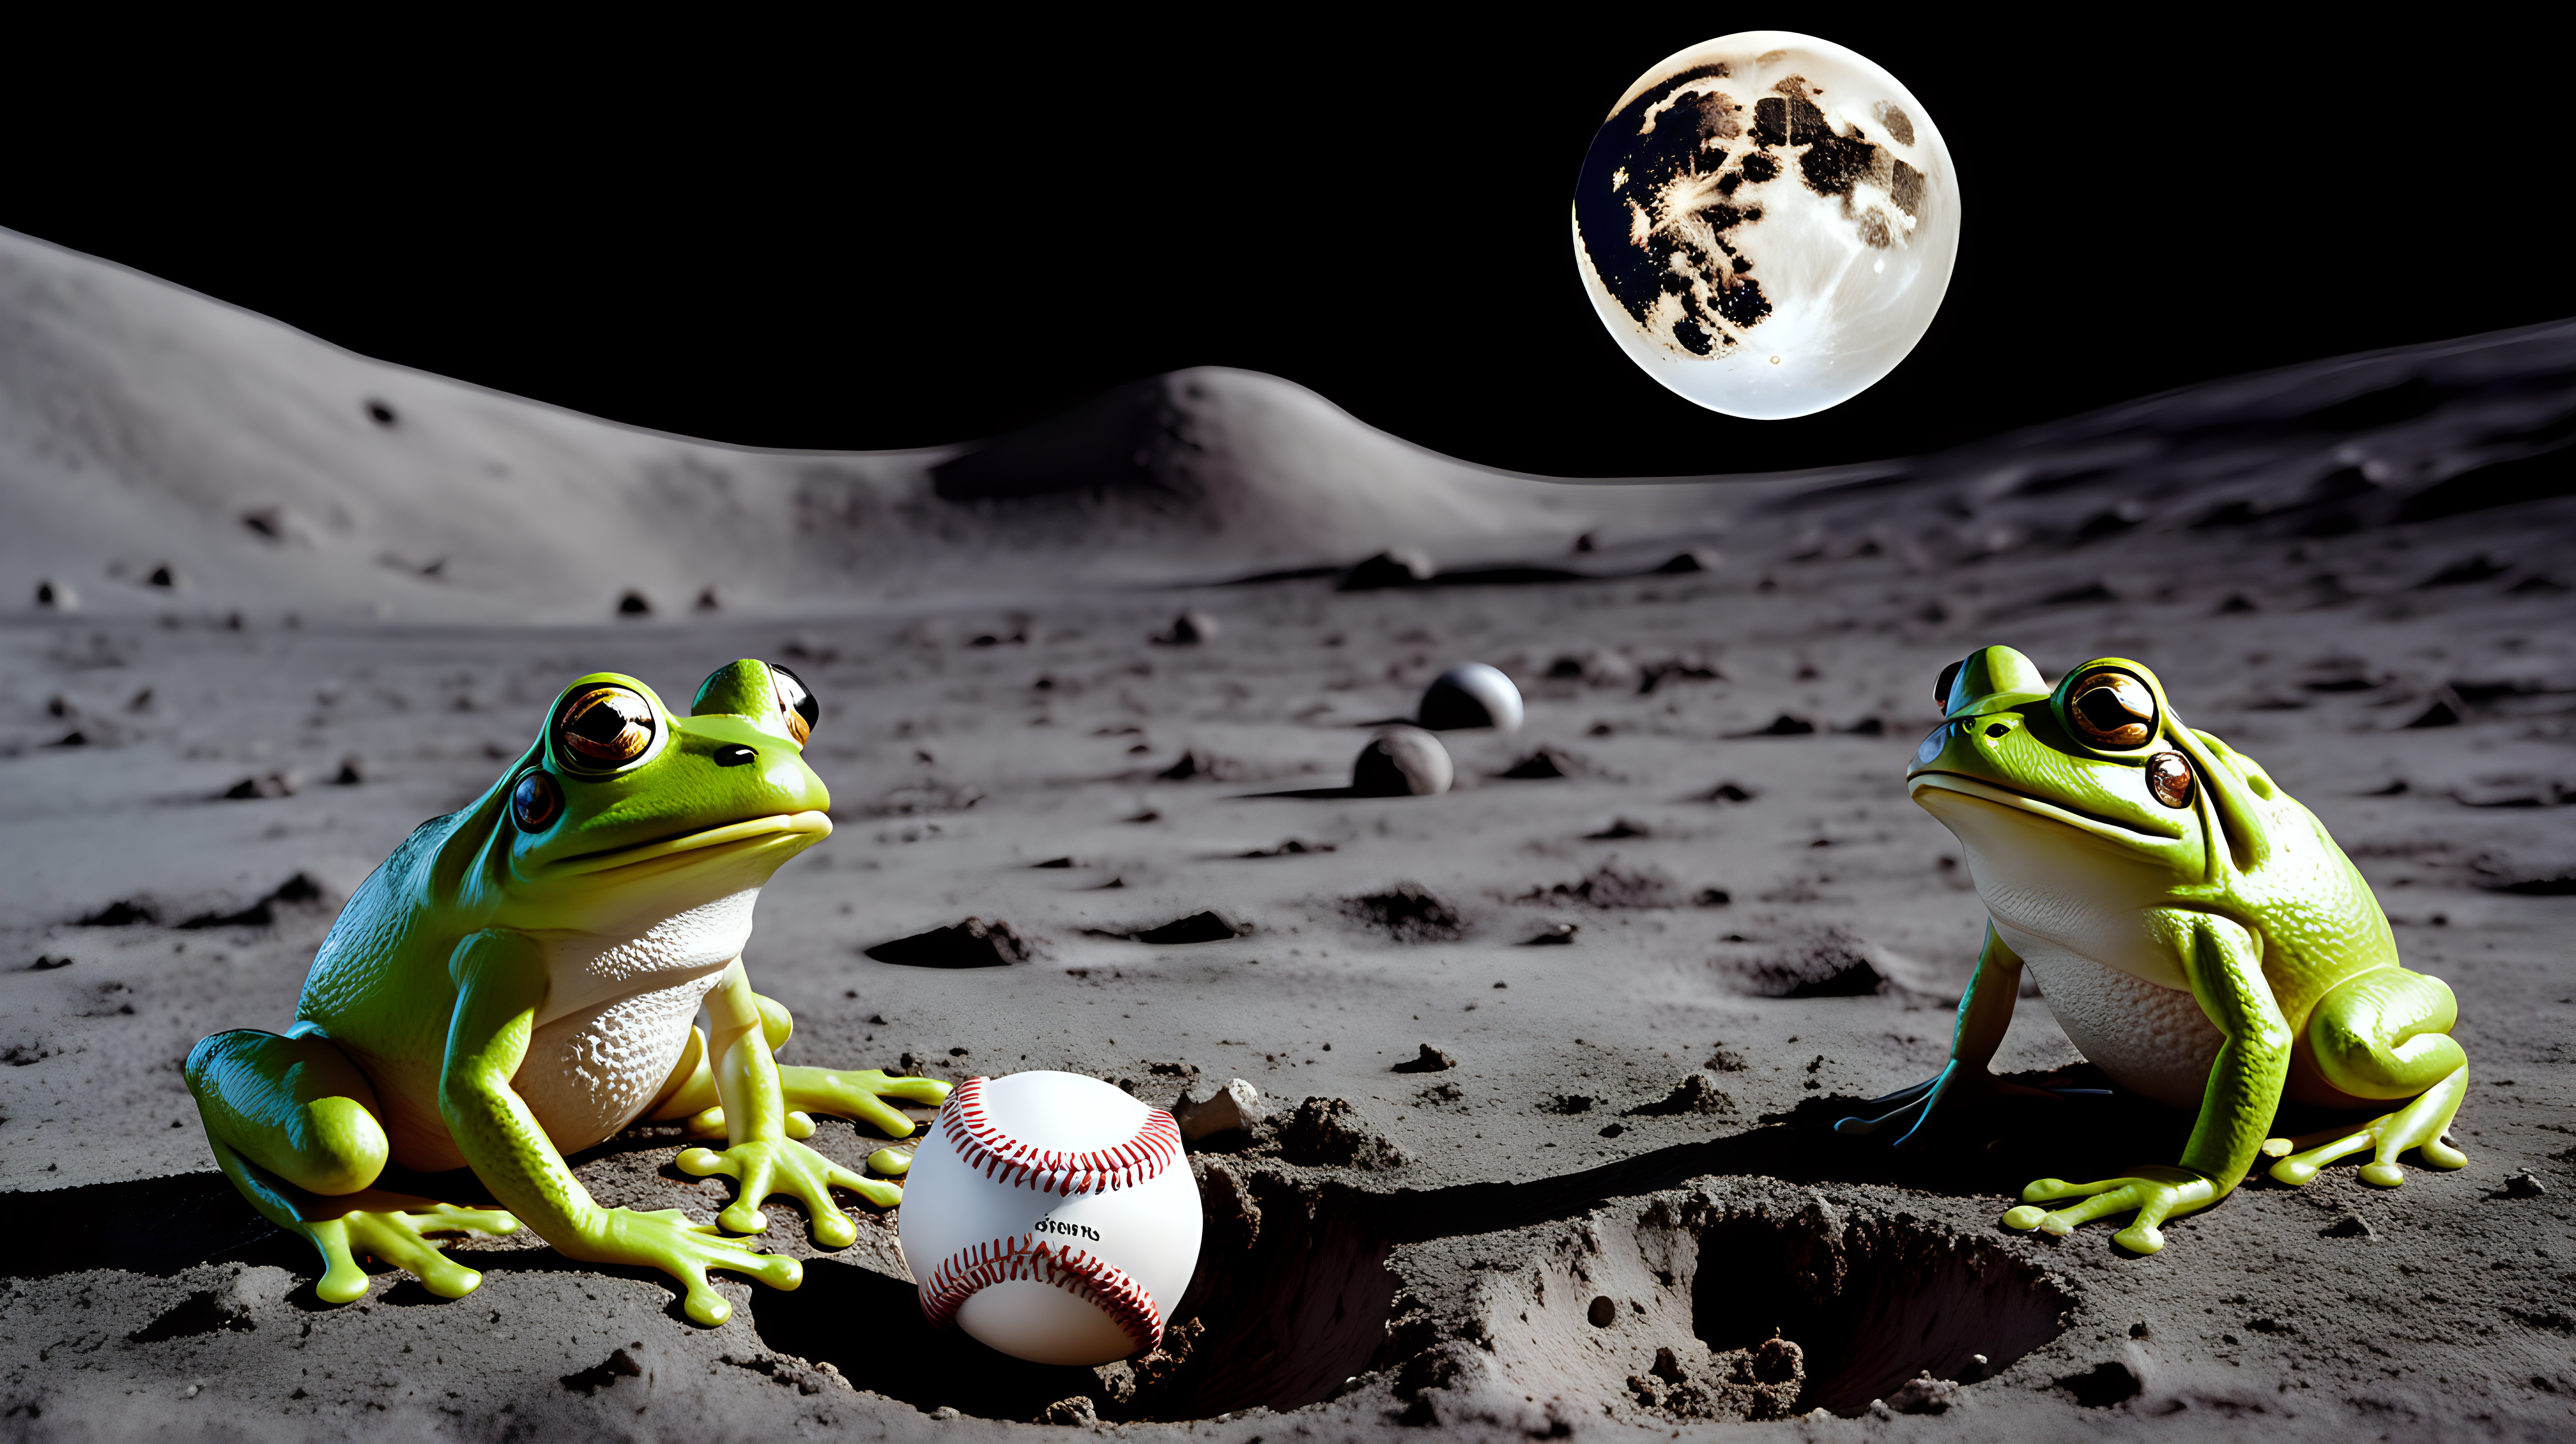 frogs playing baseball on the moon